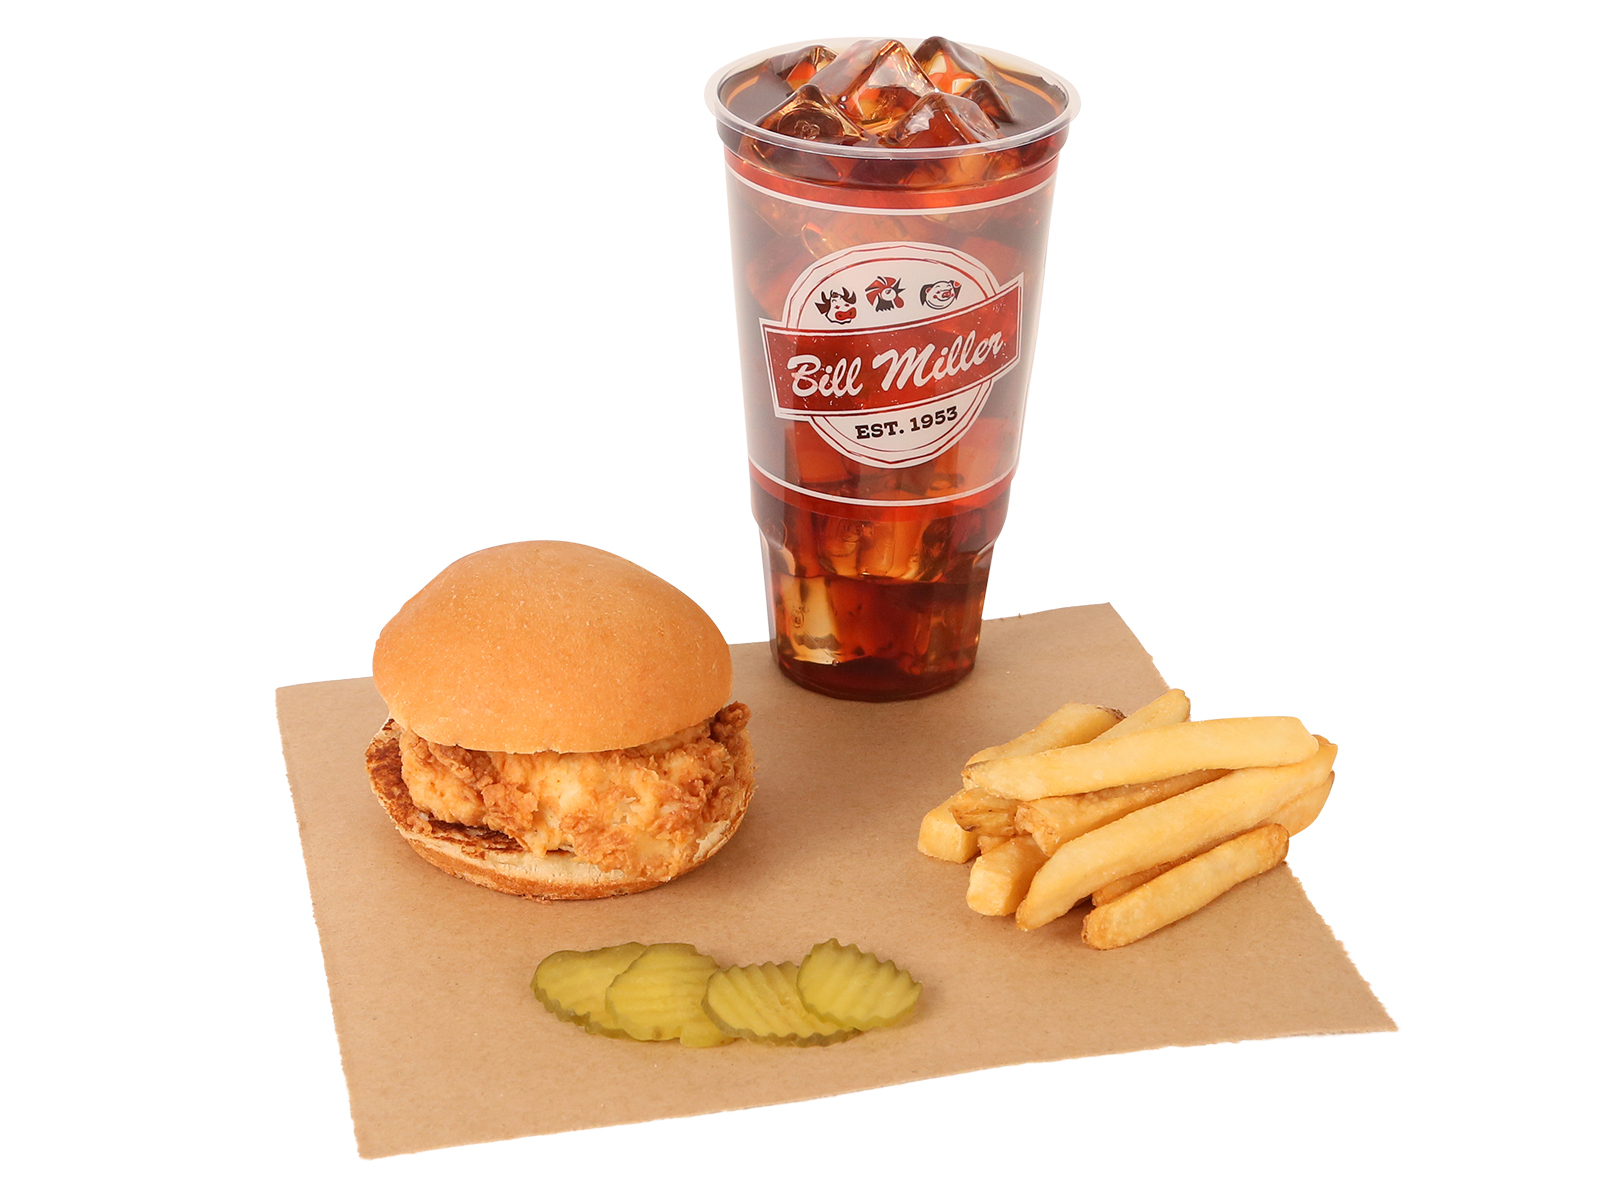 Crispy Chicken Sandwich served with french fries, pickles, & large tea